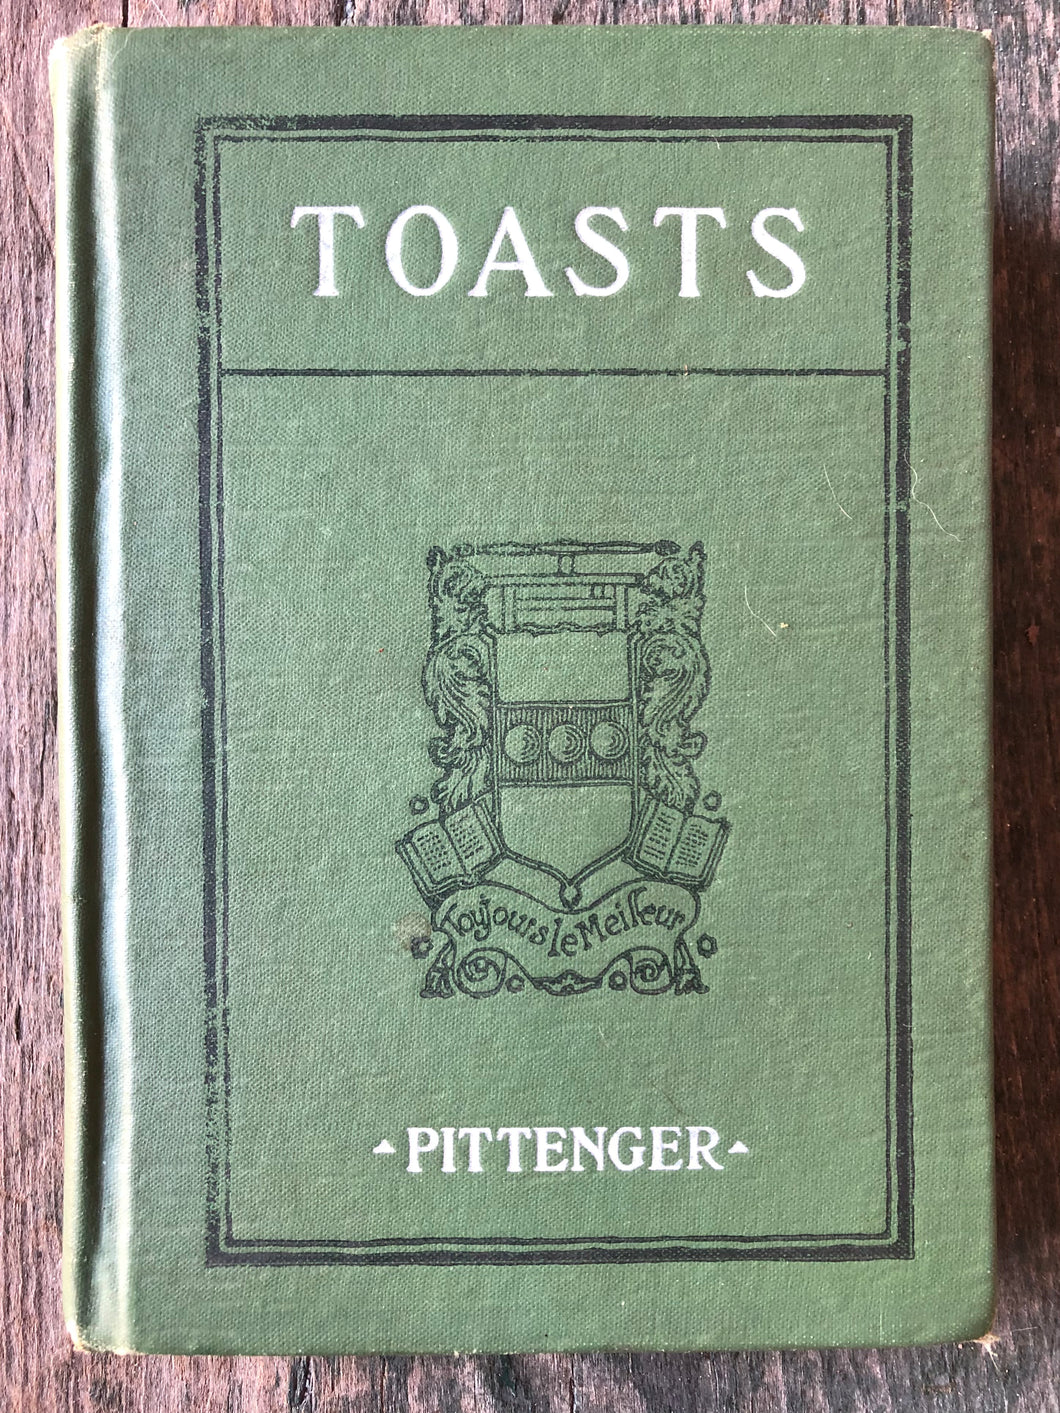 Toasts. How to Respond to Toasts or Make Other Public Addresses and Always Say the Right Thing in the Right Way by William Pittenger